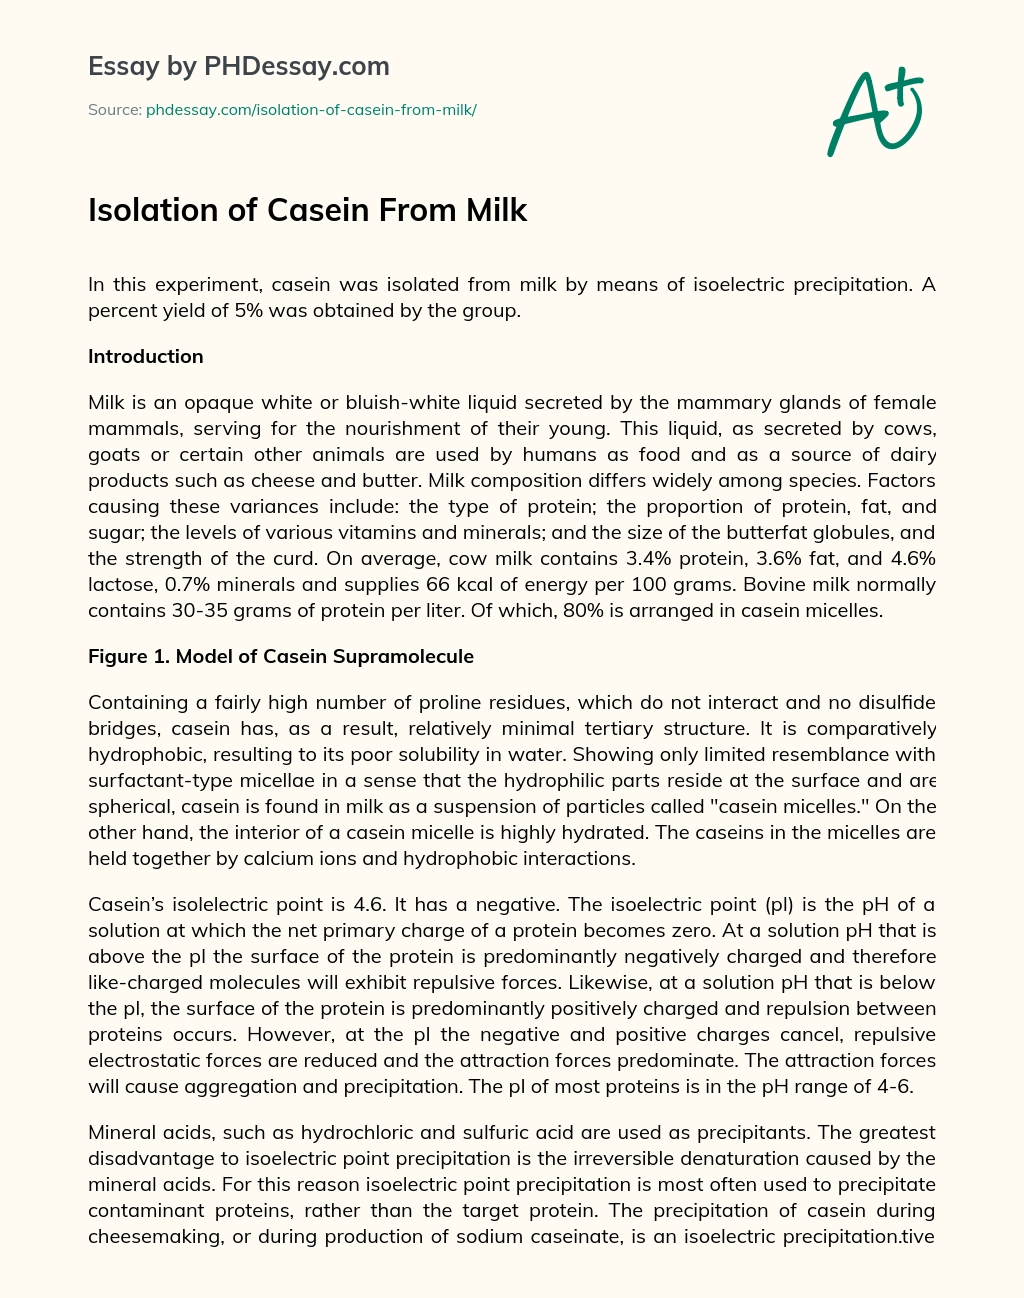 isolation of casein from milk project